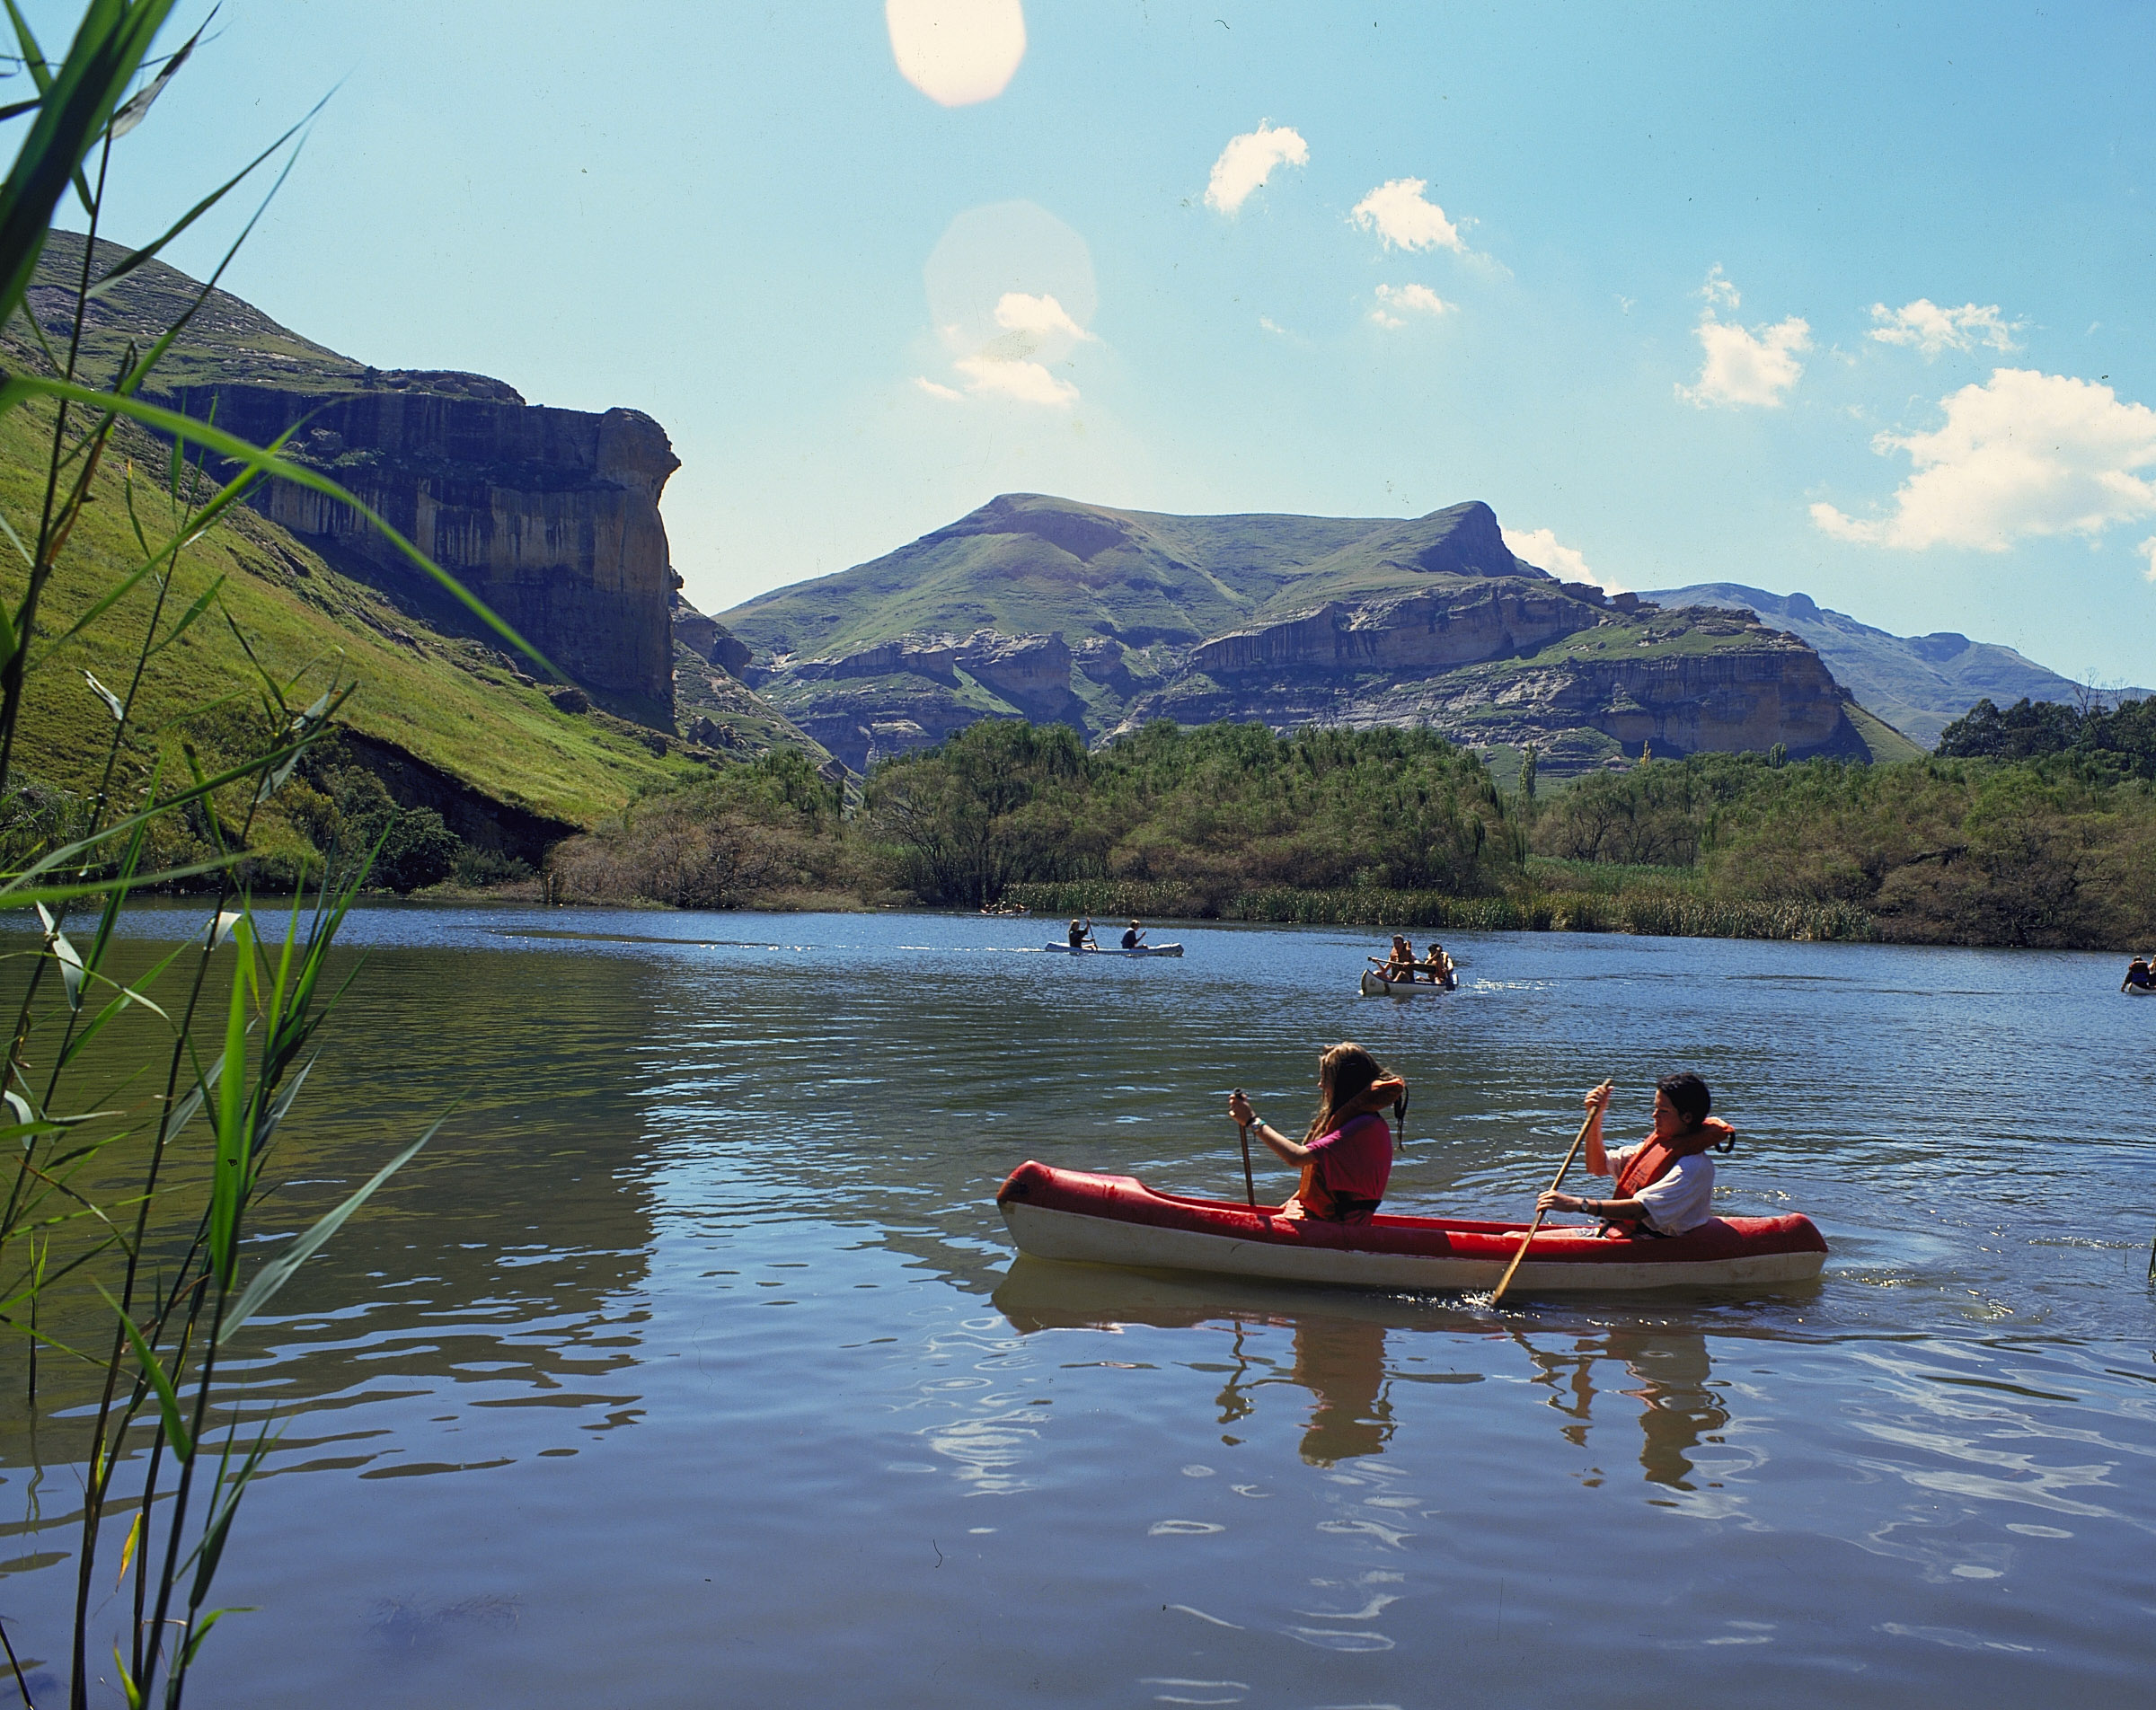 Spend some peaceful moments at Golden Gate Highlands National Park in Free State